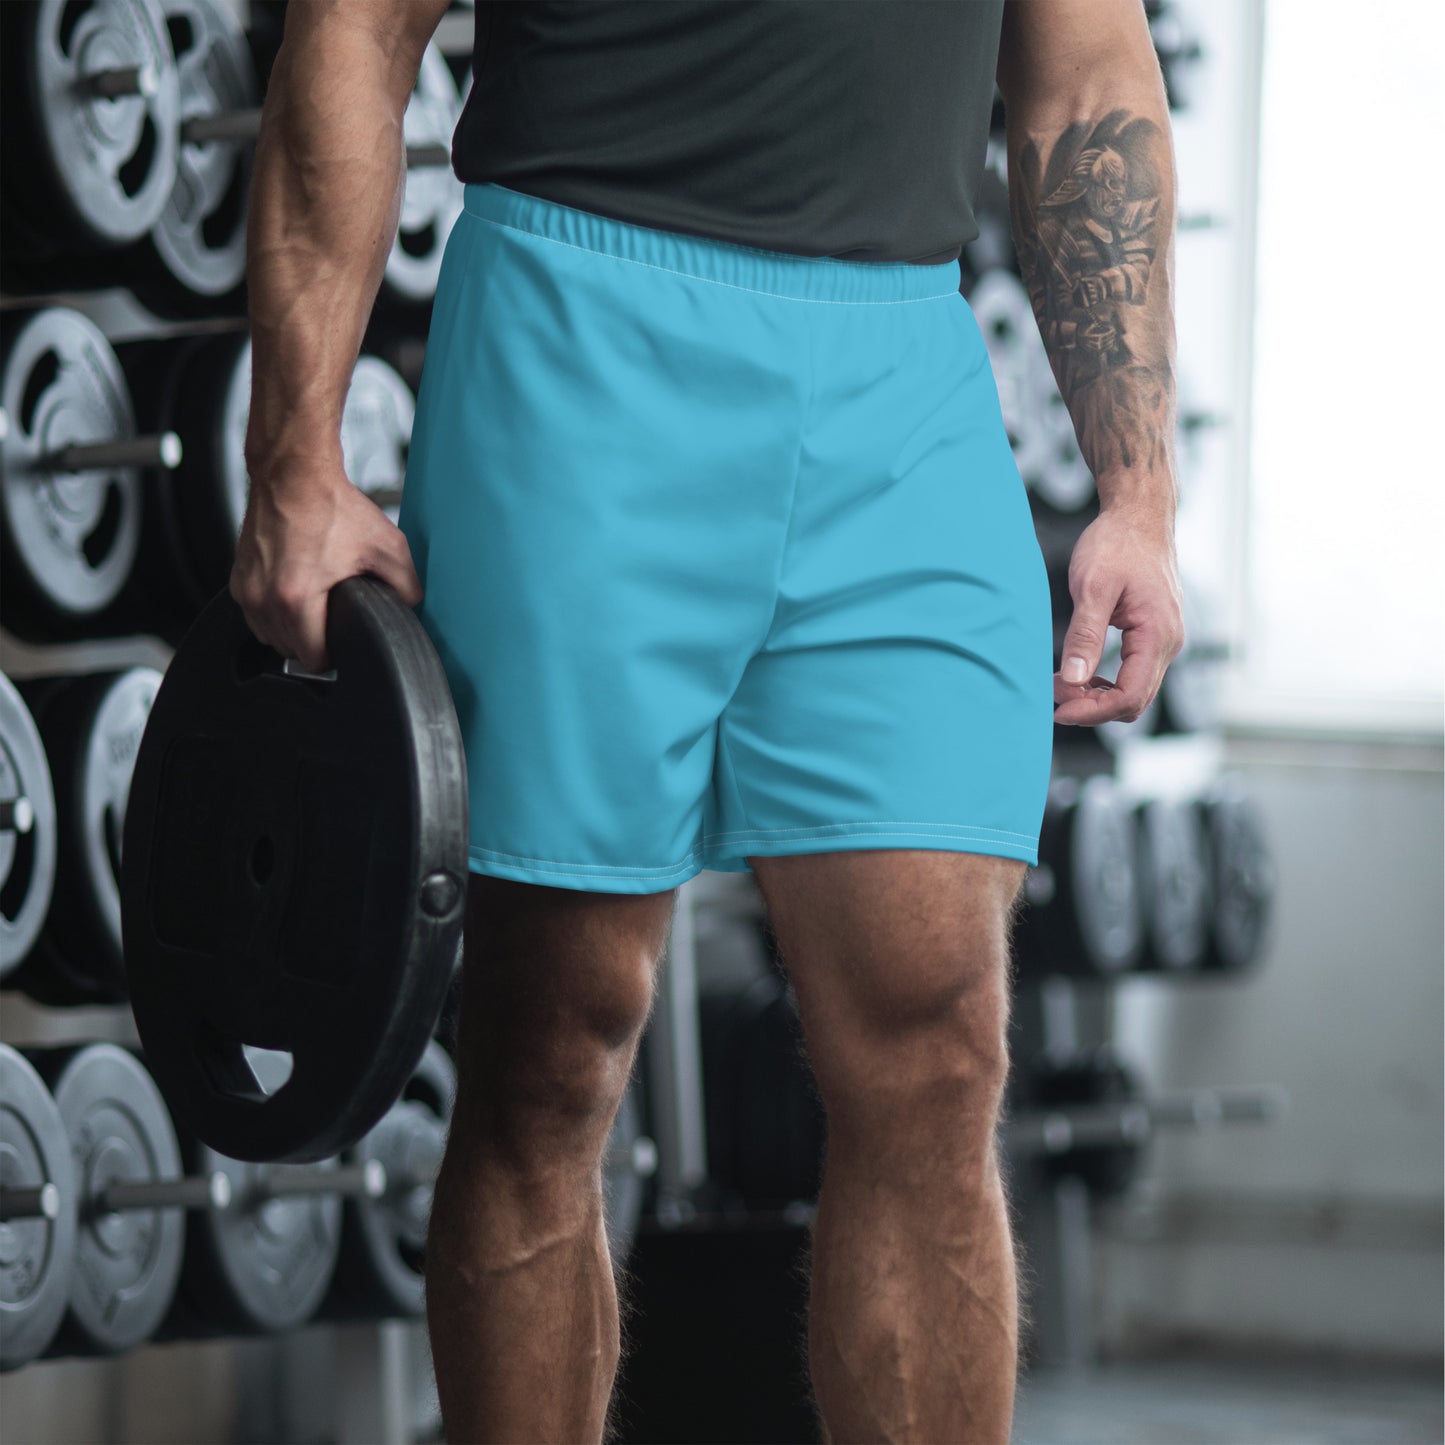 Men's Recycled Athletic Shorts - Light Blue